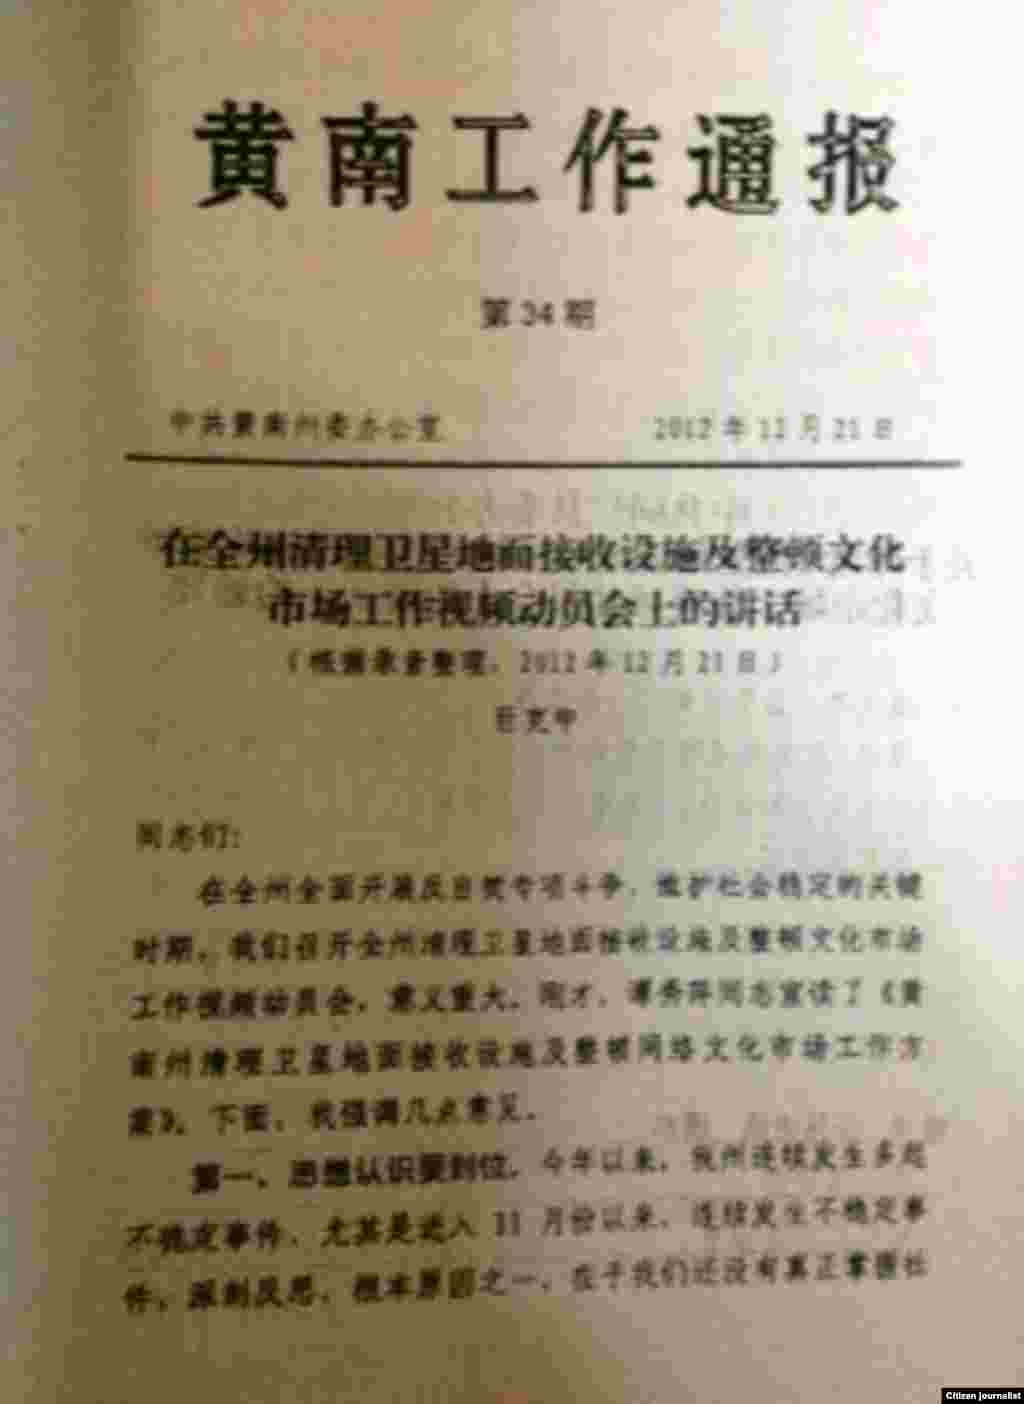 Official documents posted by the deputy secretary of the Huangnan area about investigation of satellite TV reception facilities.